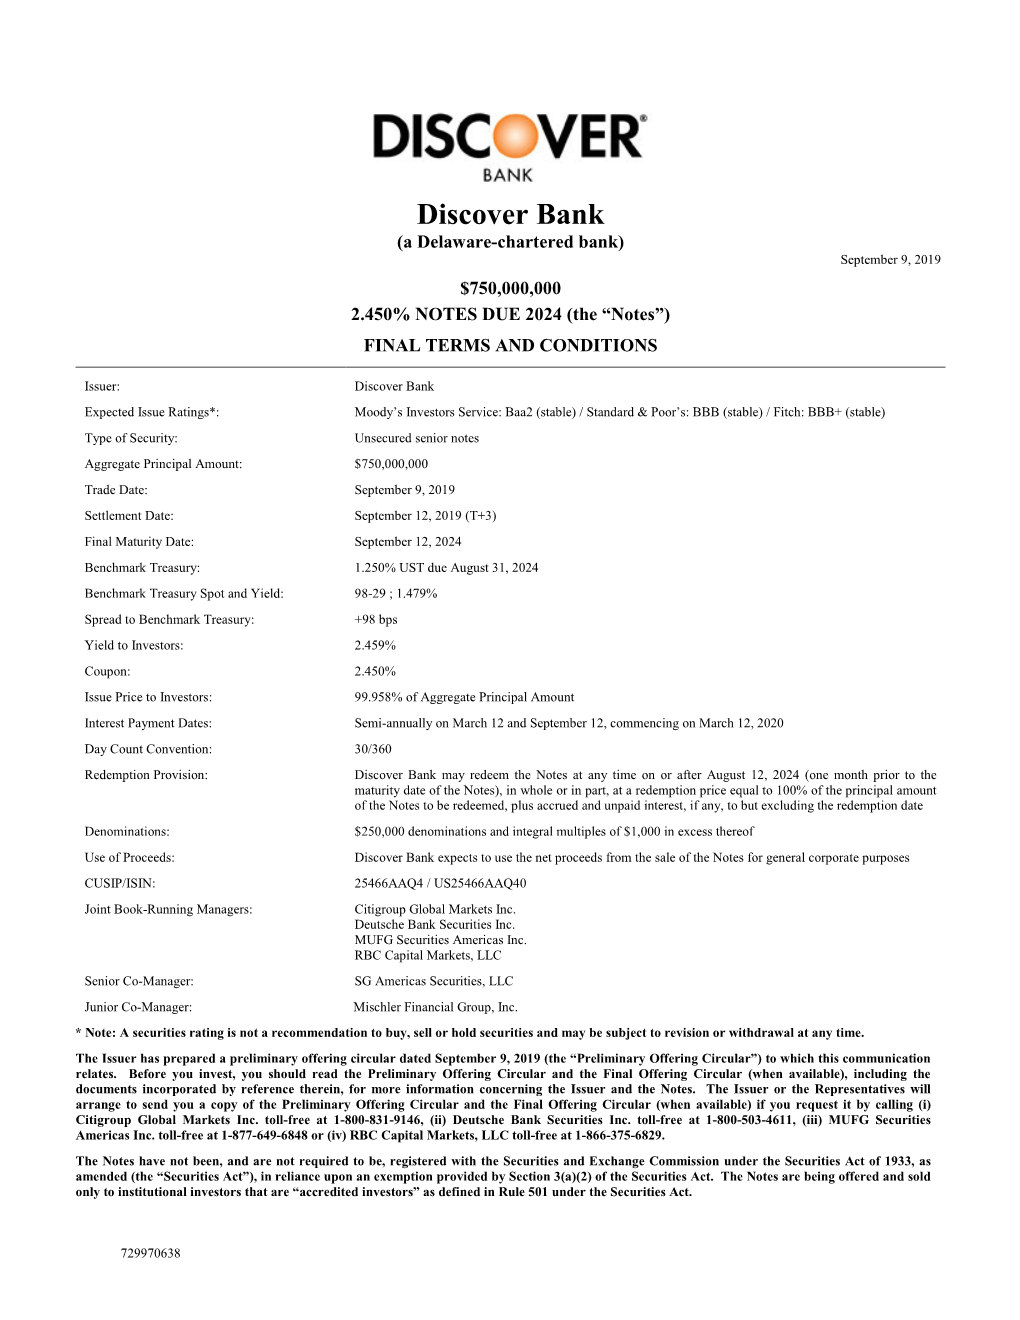 Discover Bank (A Delaware-Chartered Bank) September 9, 2019 $750,000,000 2.450% NOTES DUE 2024 (The “Notes”) FINAL TERMS and CONDITIONS